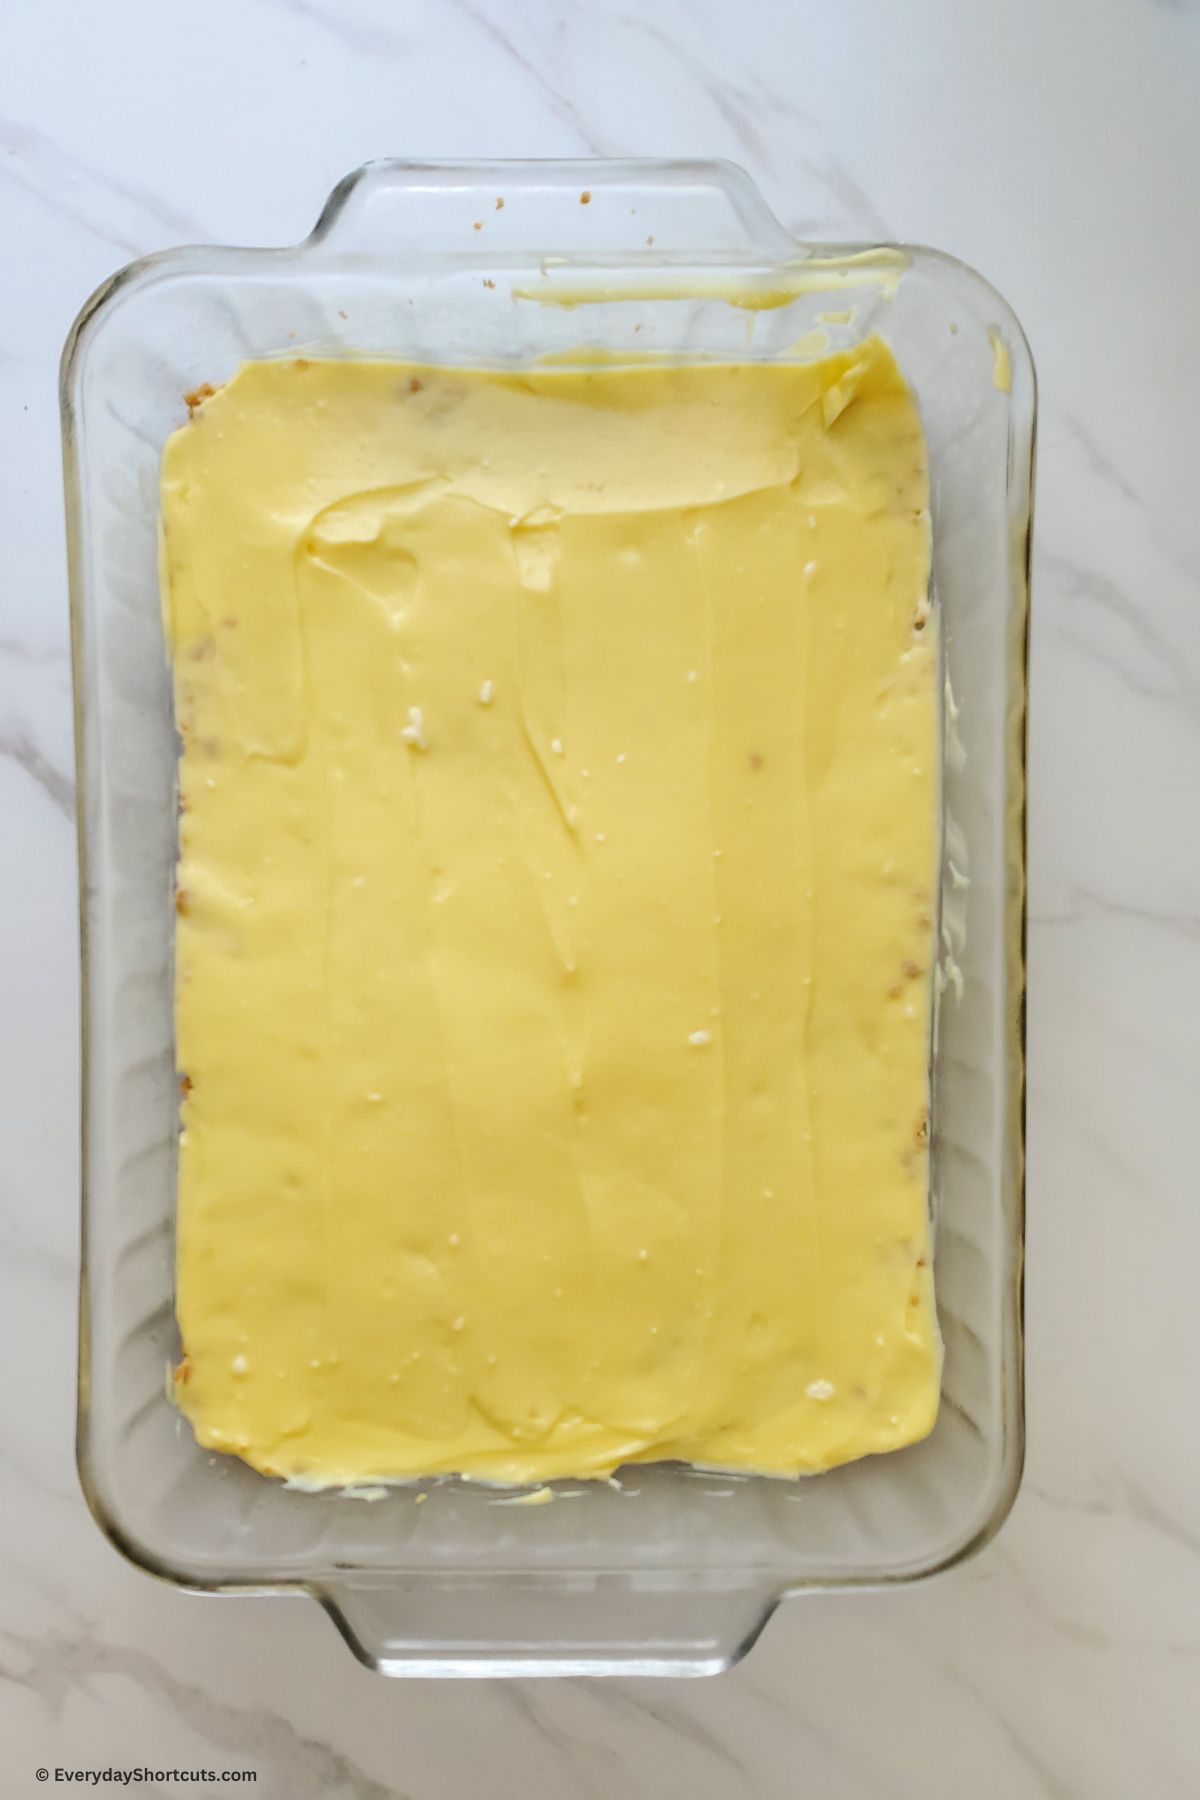 creamy pudding layer in a a baking dish